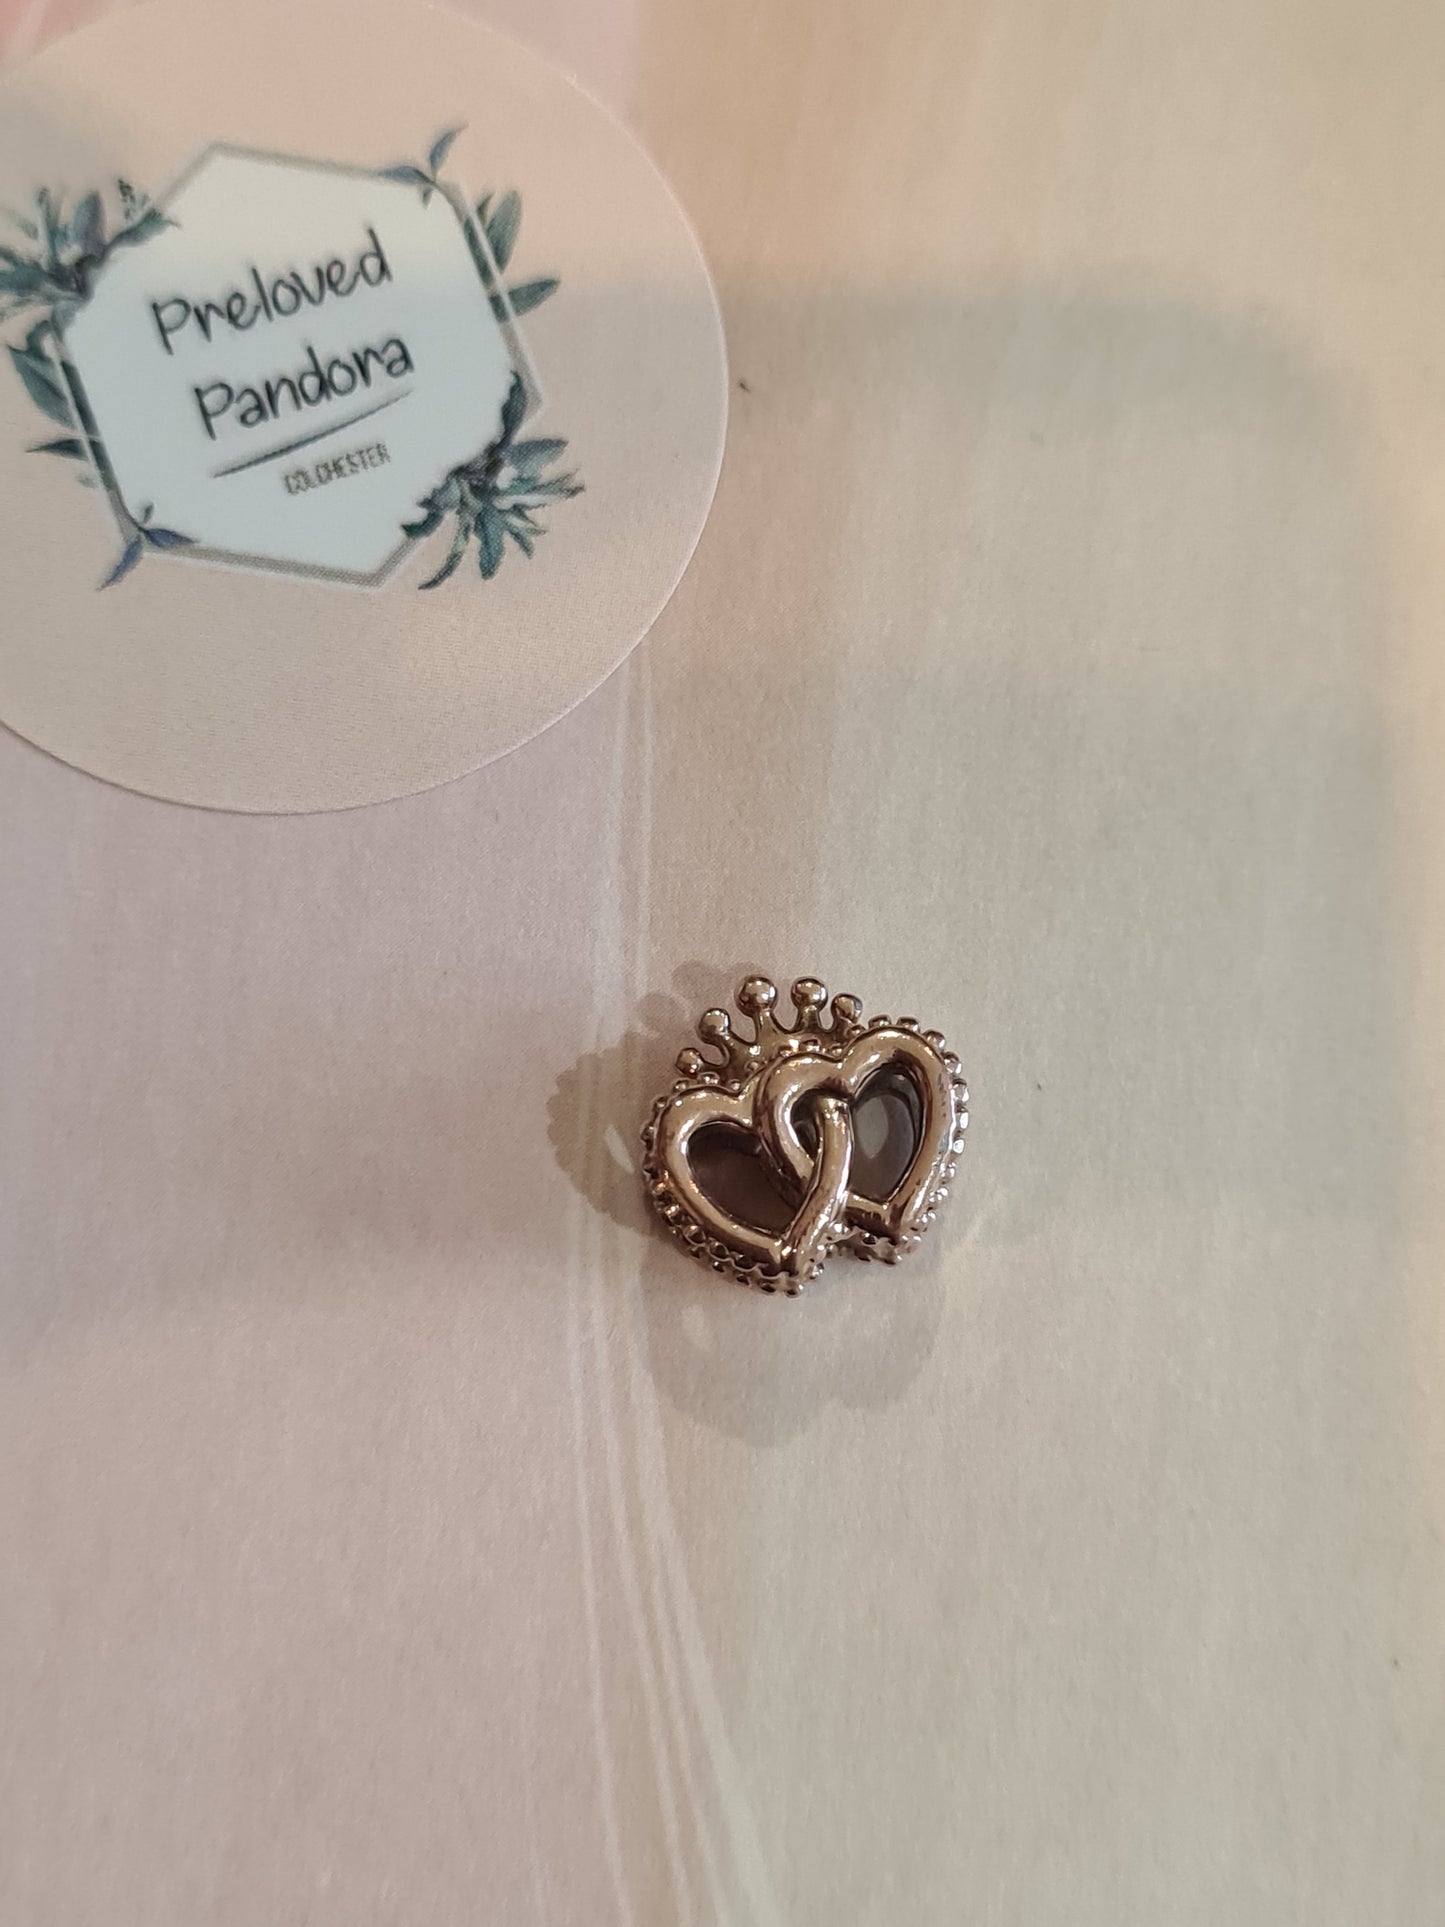 Genuine Pandora Rose Gold Double Heart Charm With Crown